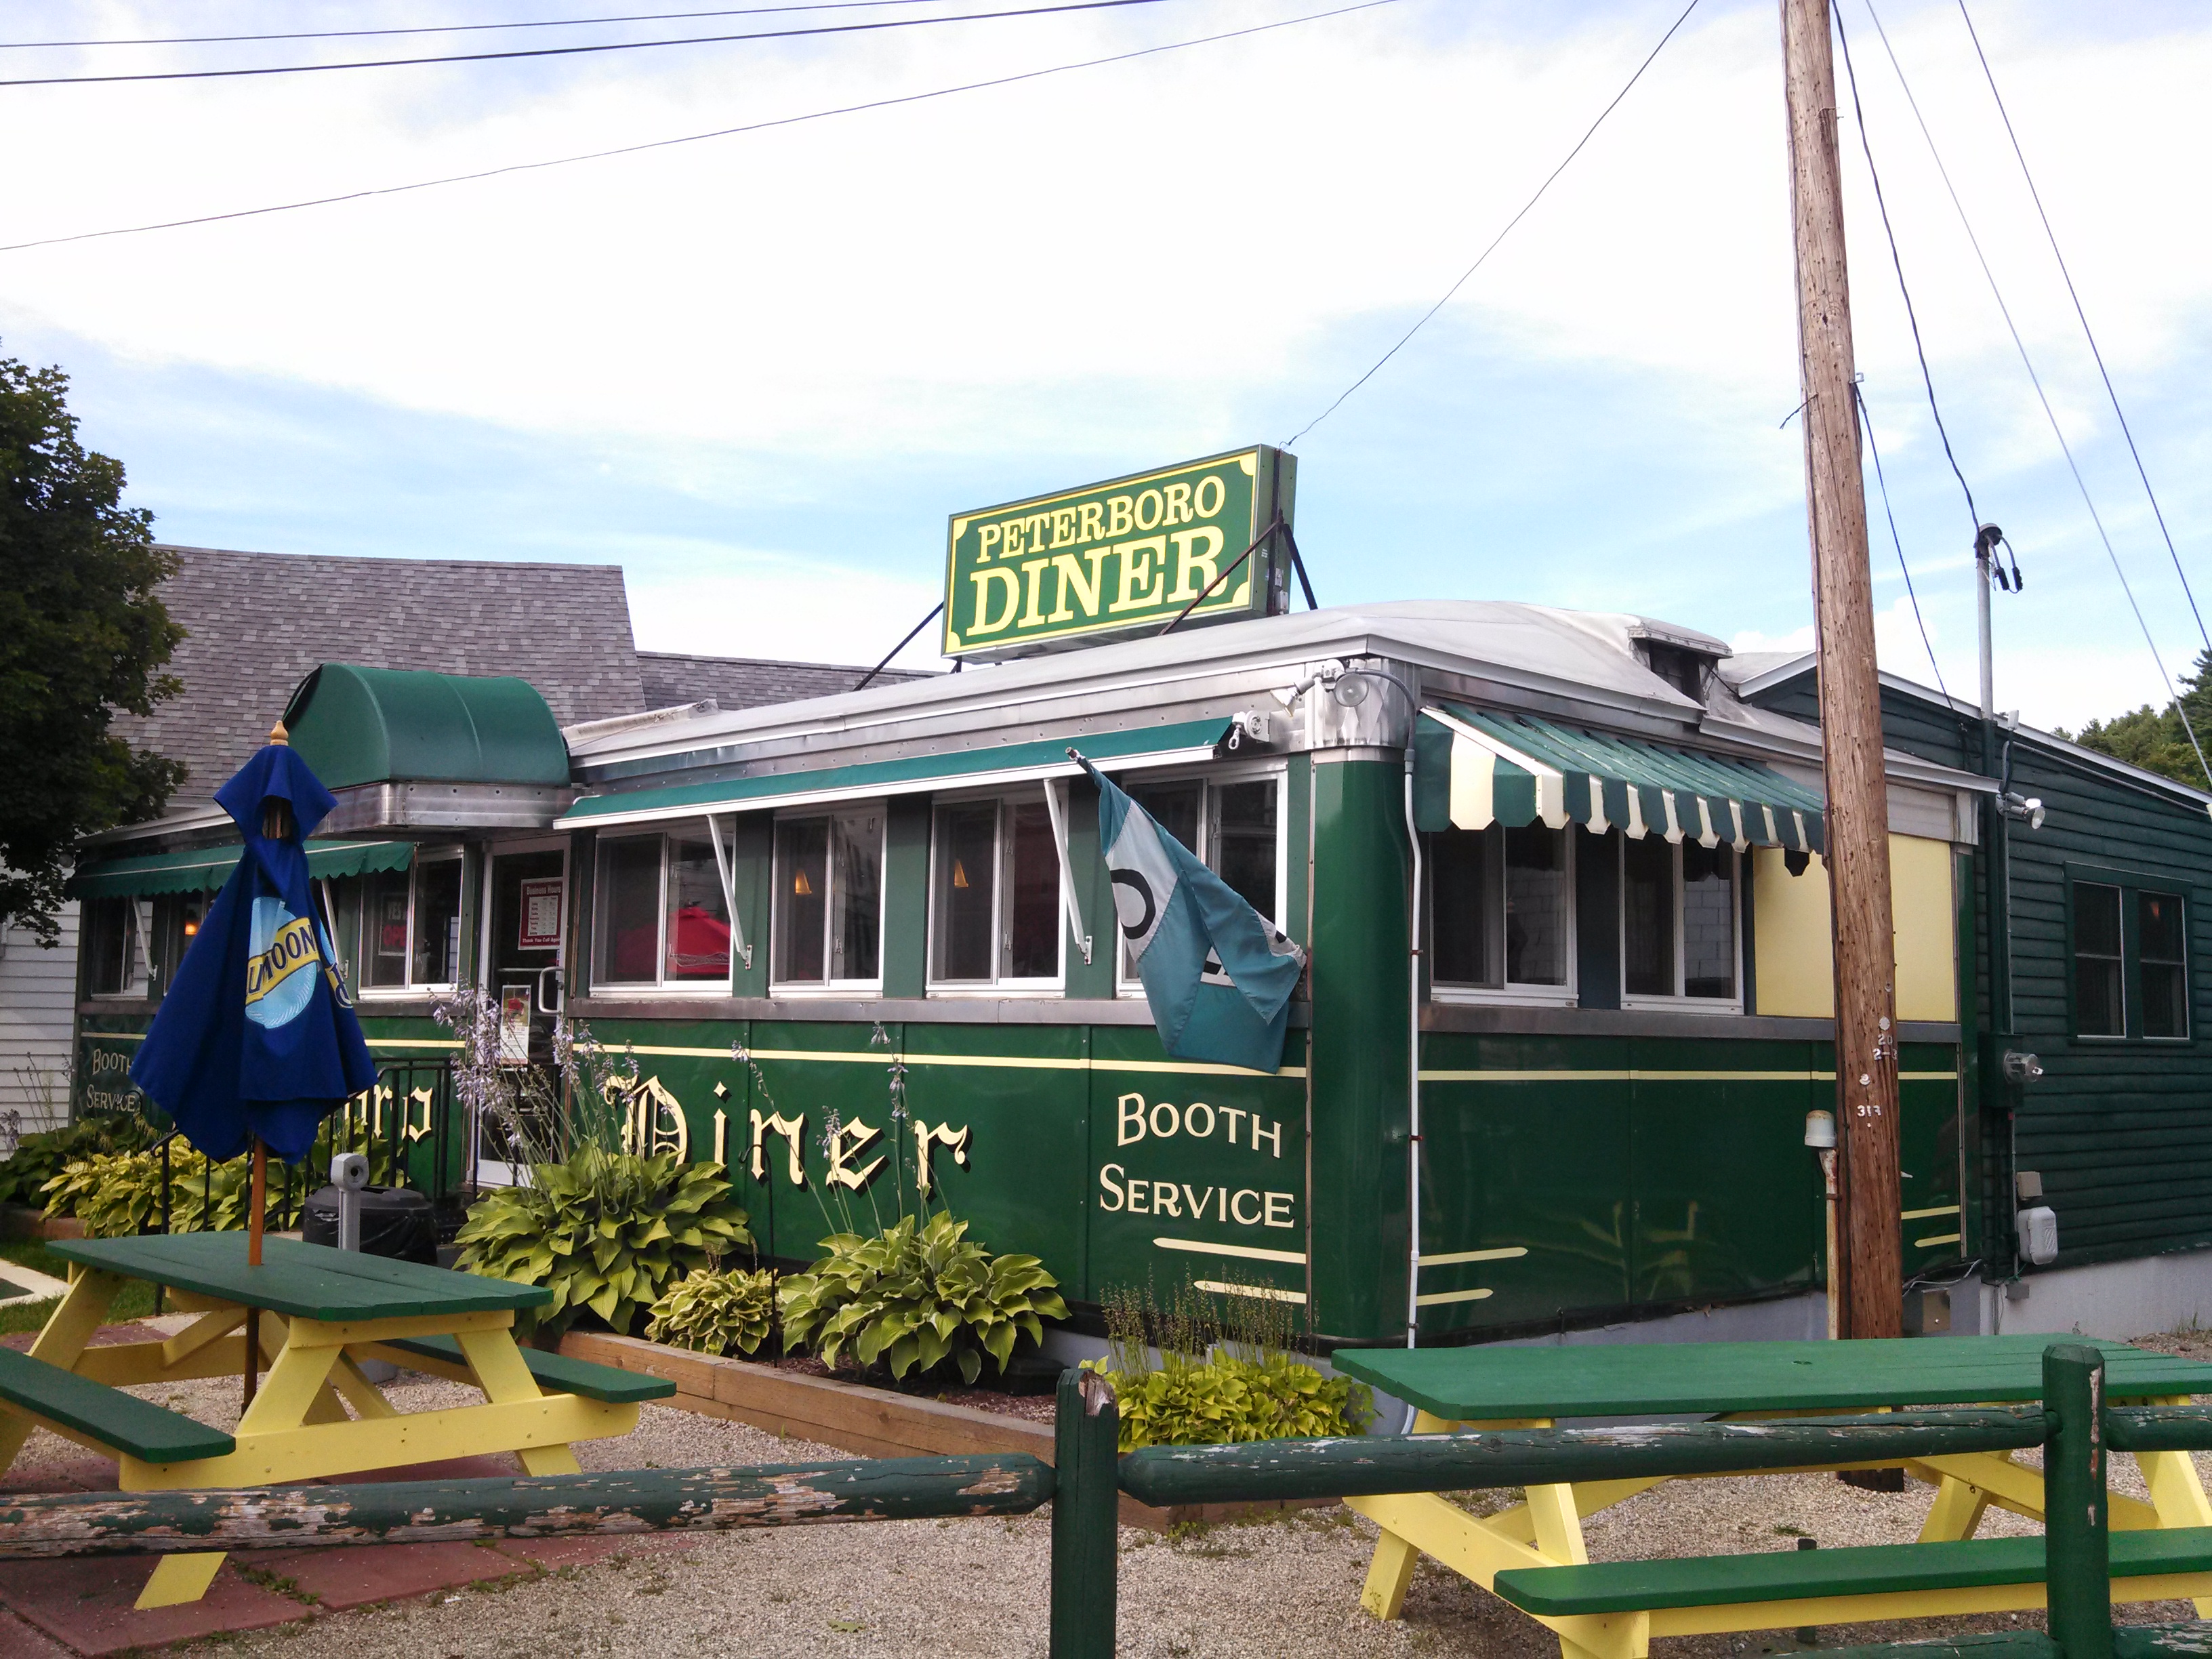 http://upload.wikimedia.org/wikipedia/commons/a/a8/Peterboro_Diner,_Peterborough_NH.jpg